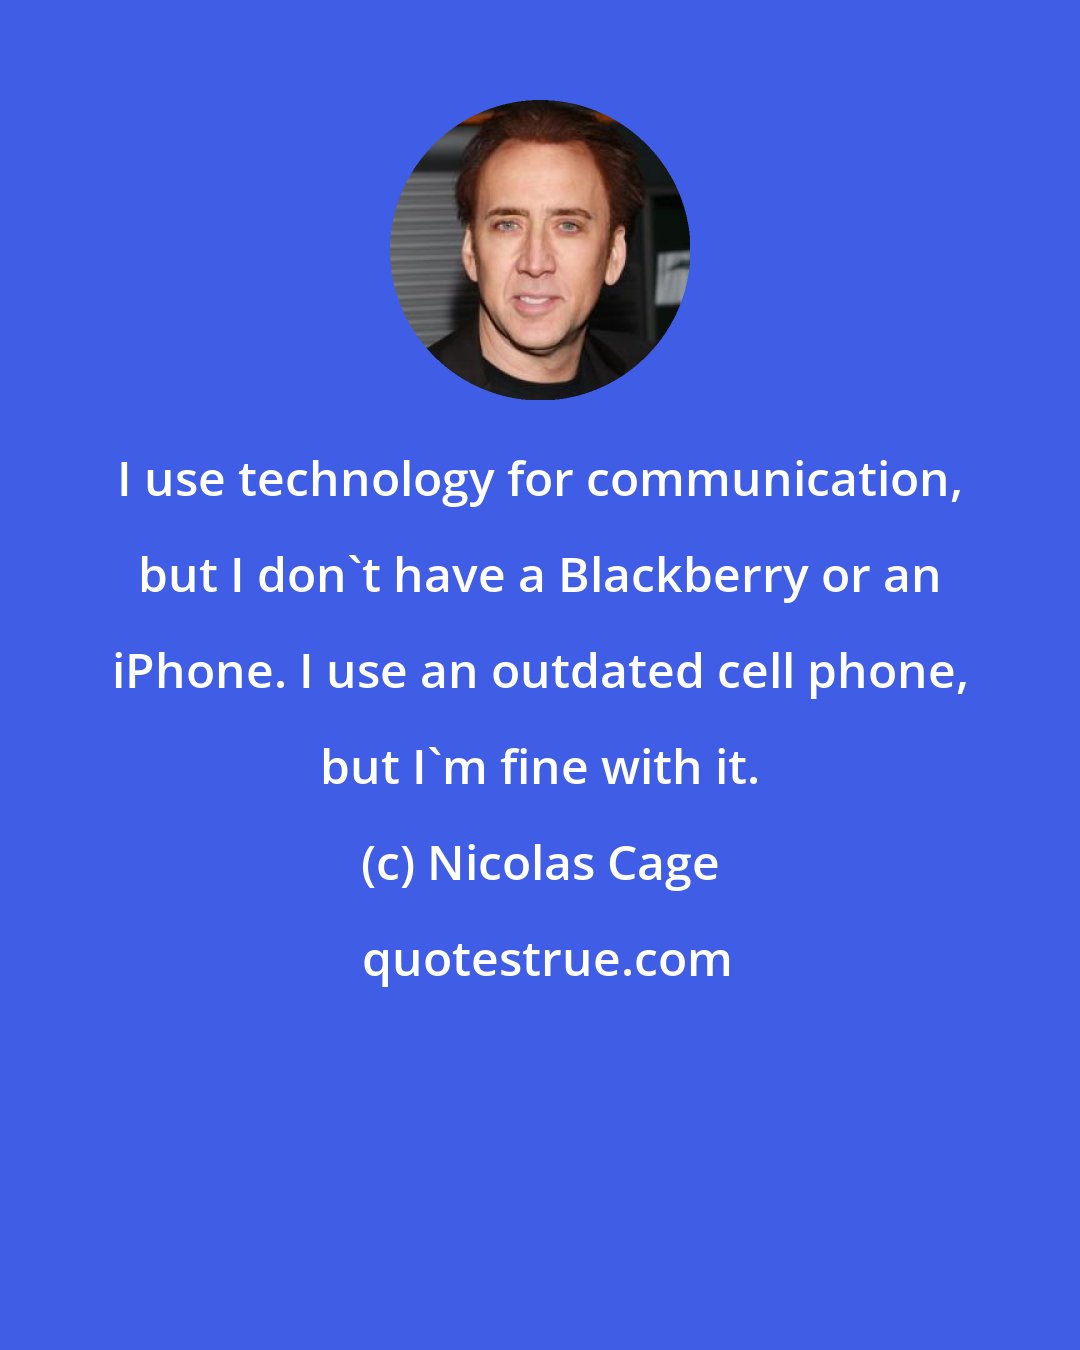 Nicolas Cage: I use technology for communication, but I don't have a Blackberry or an iPhone. I use an outdated cell phone, but I'm fine with it.